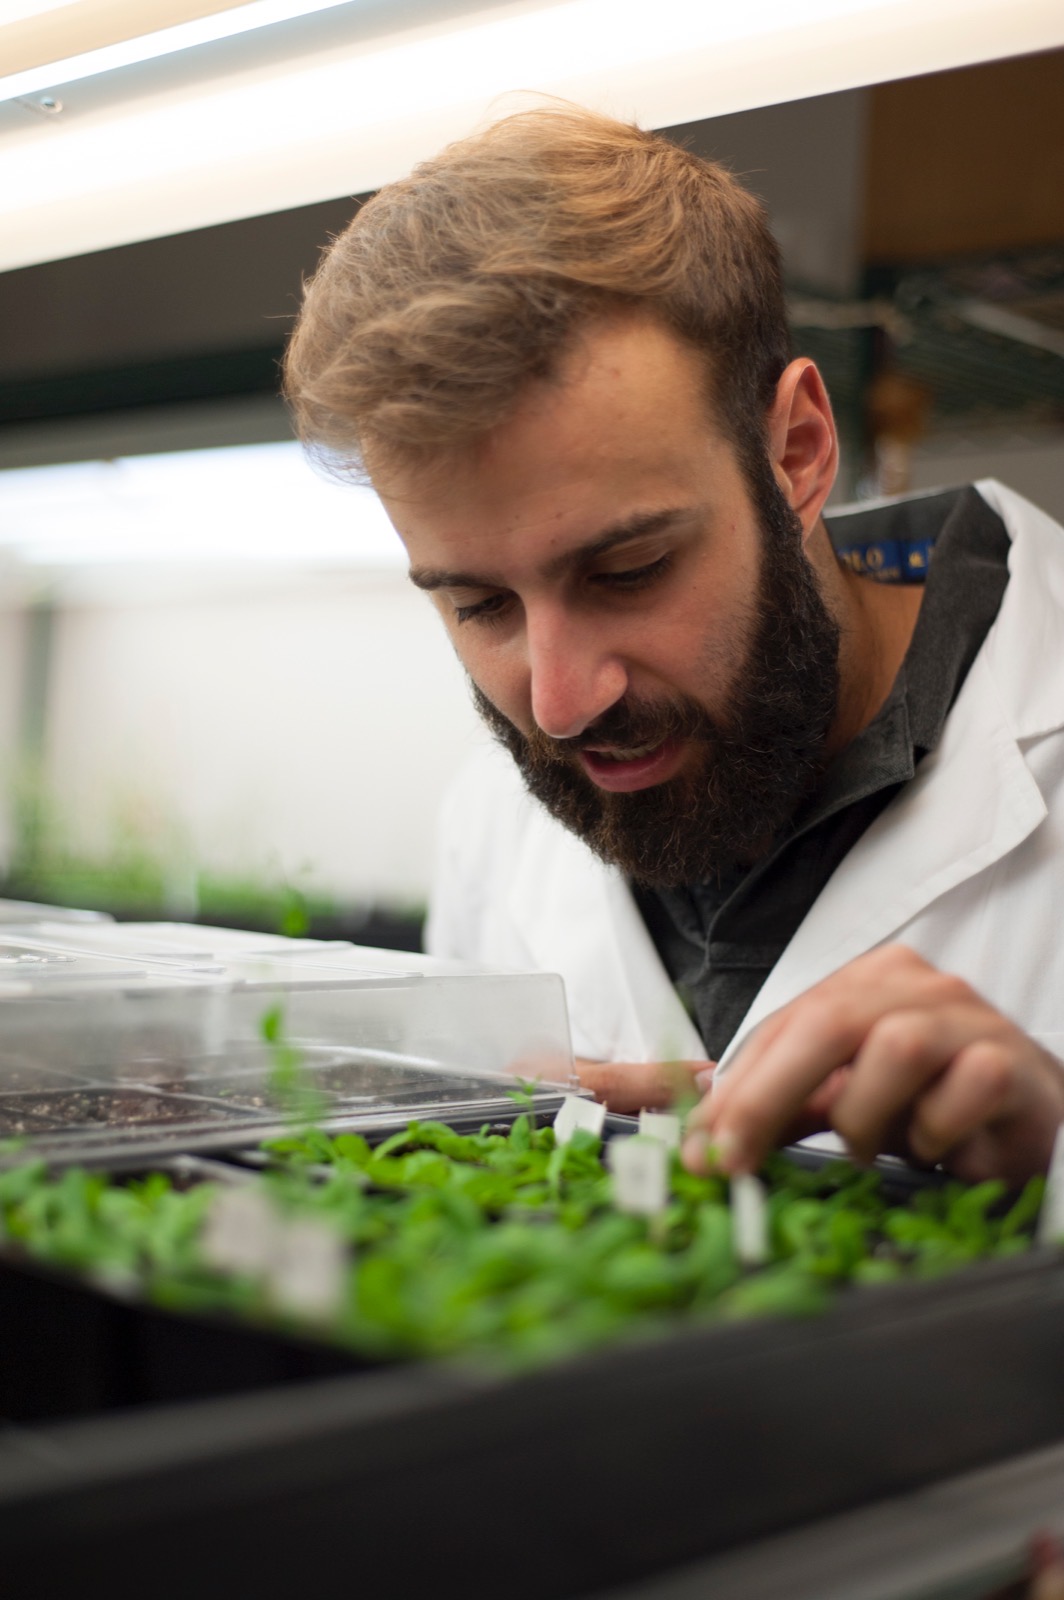 Borja Barbero is donned in a white coat. He looks down on green plants that sit in a black tray. He touches one of the plants with his finger.